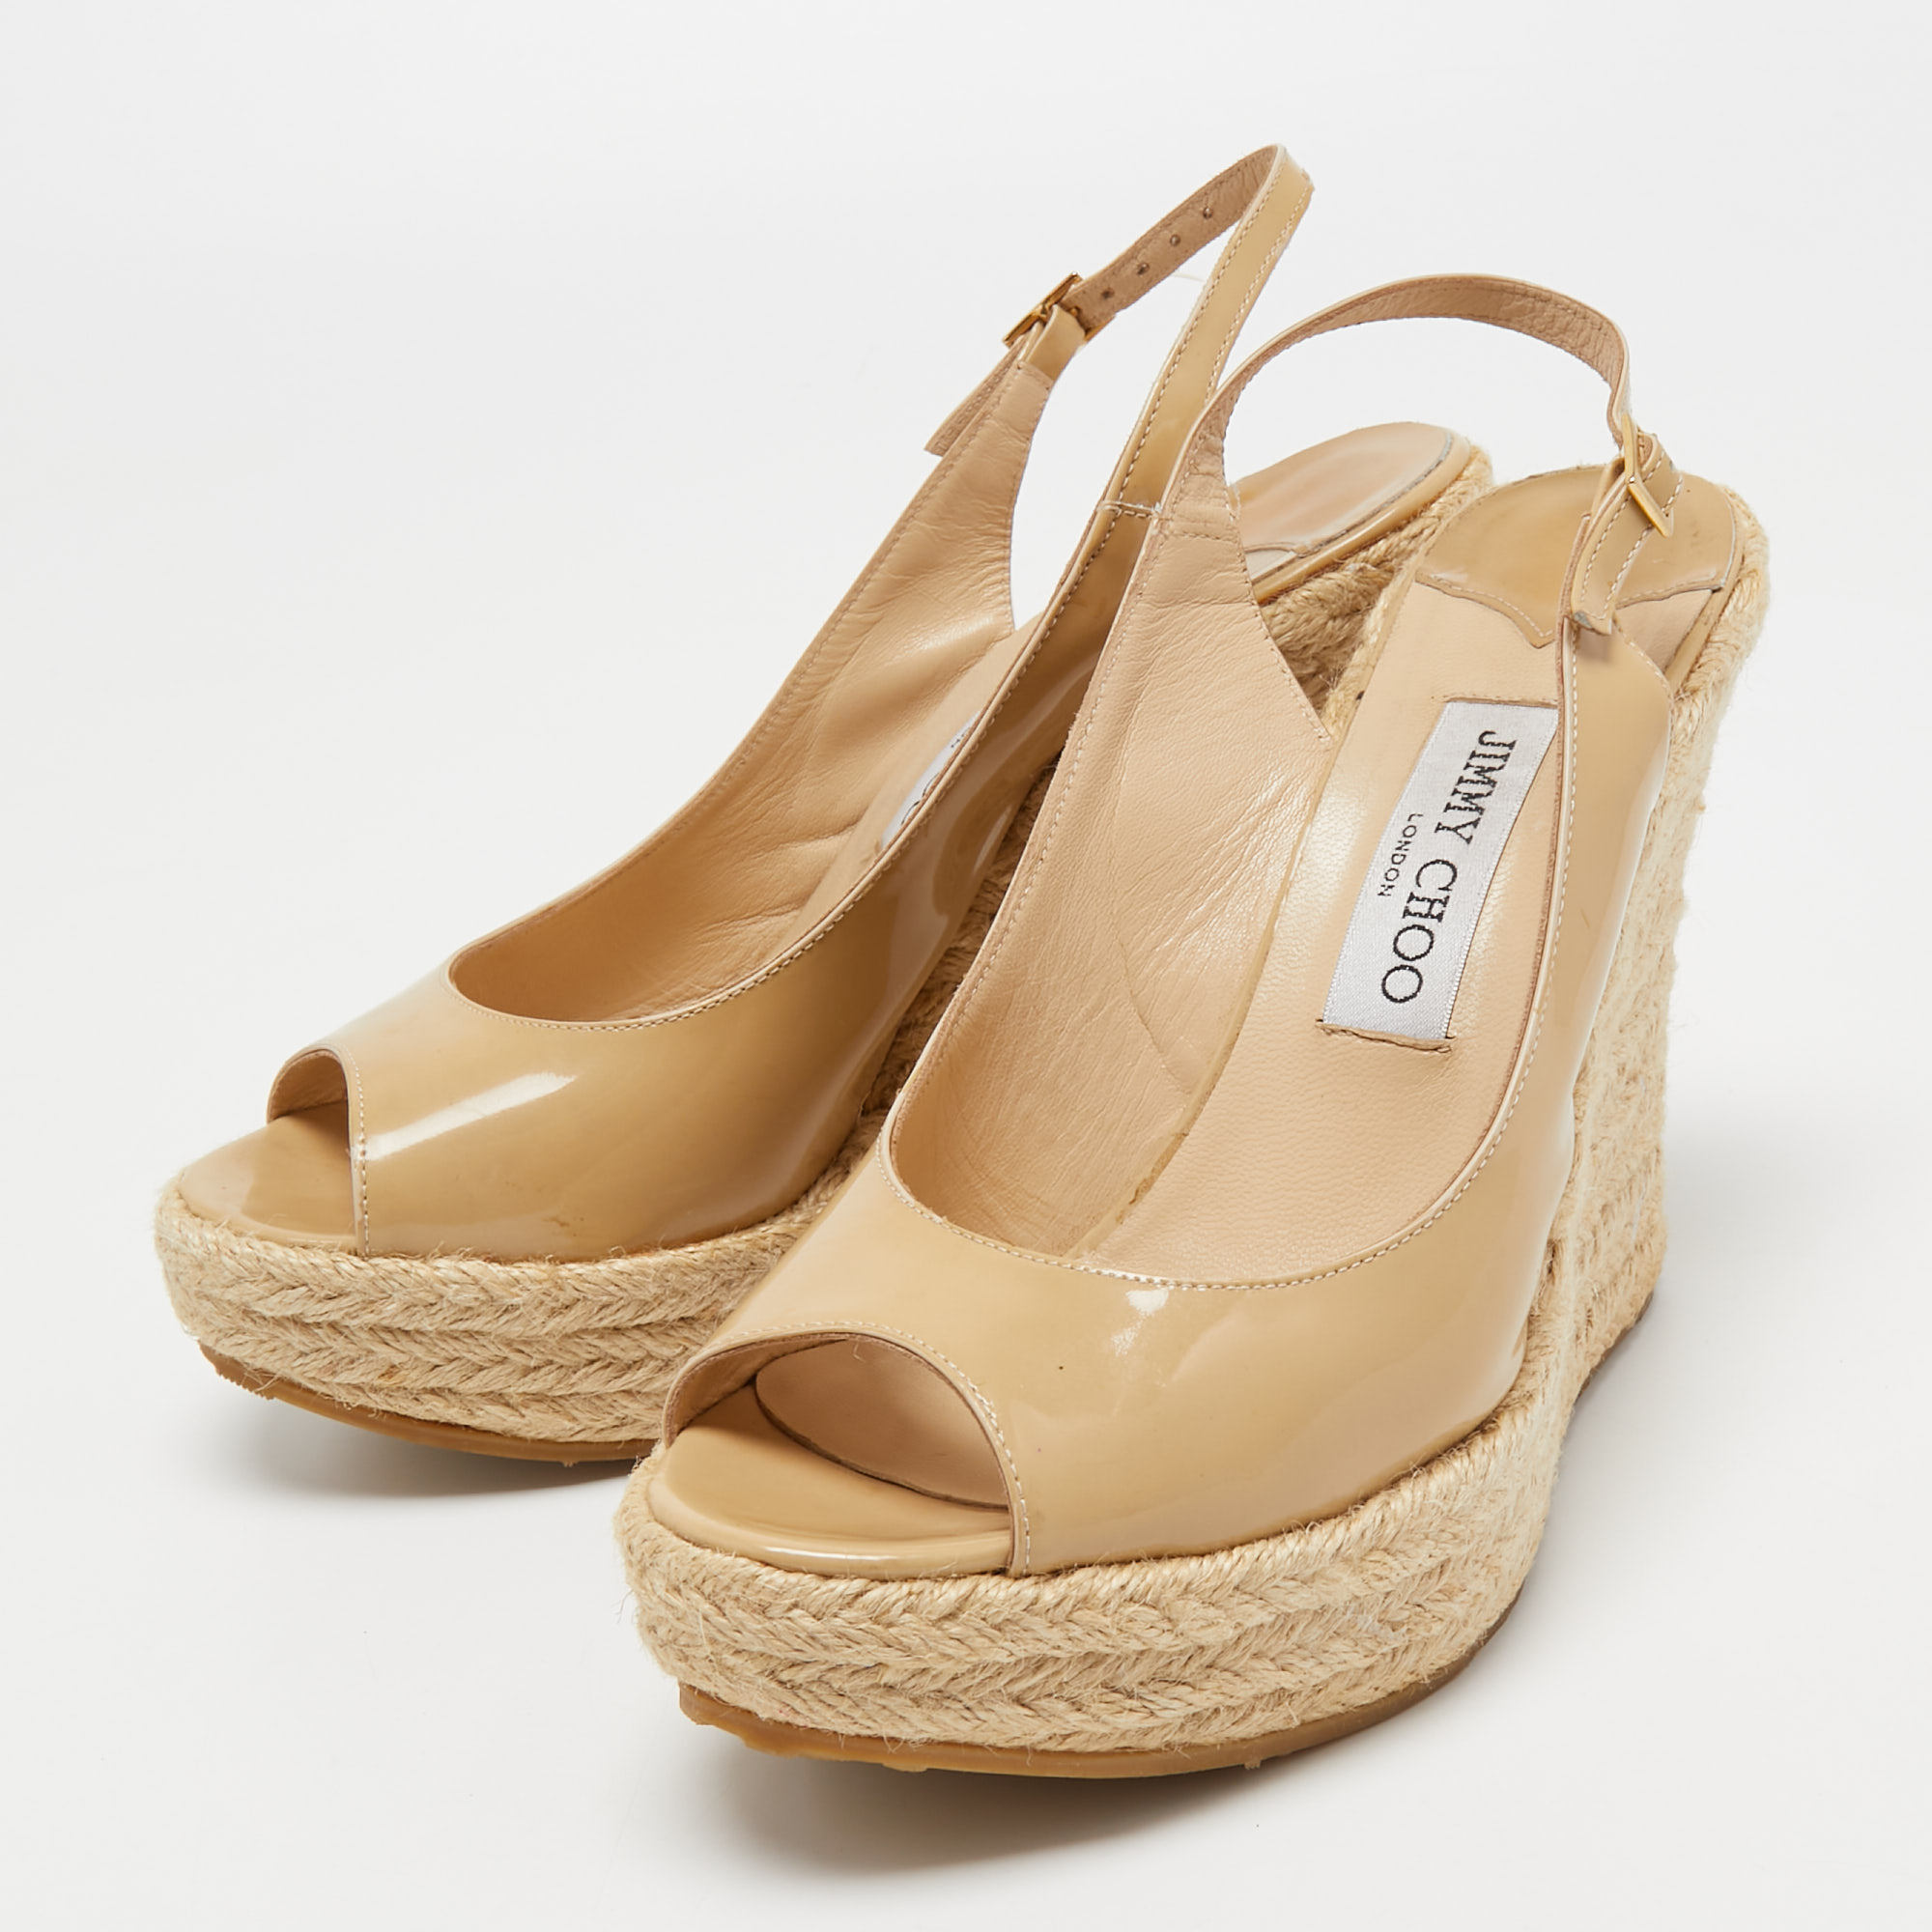 

Jimmy Choo Beige Patent Leather Espadrille Wedge Sandals Size